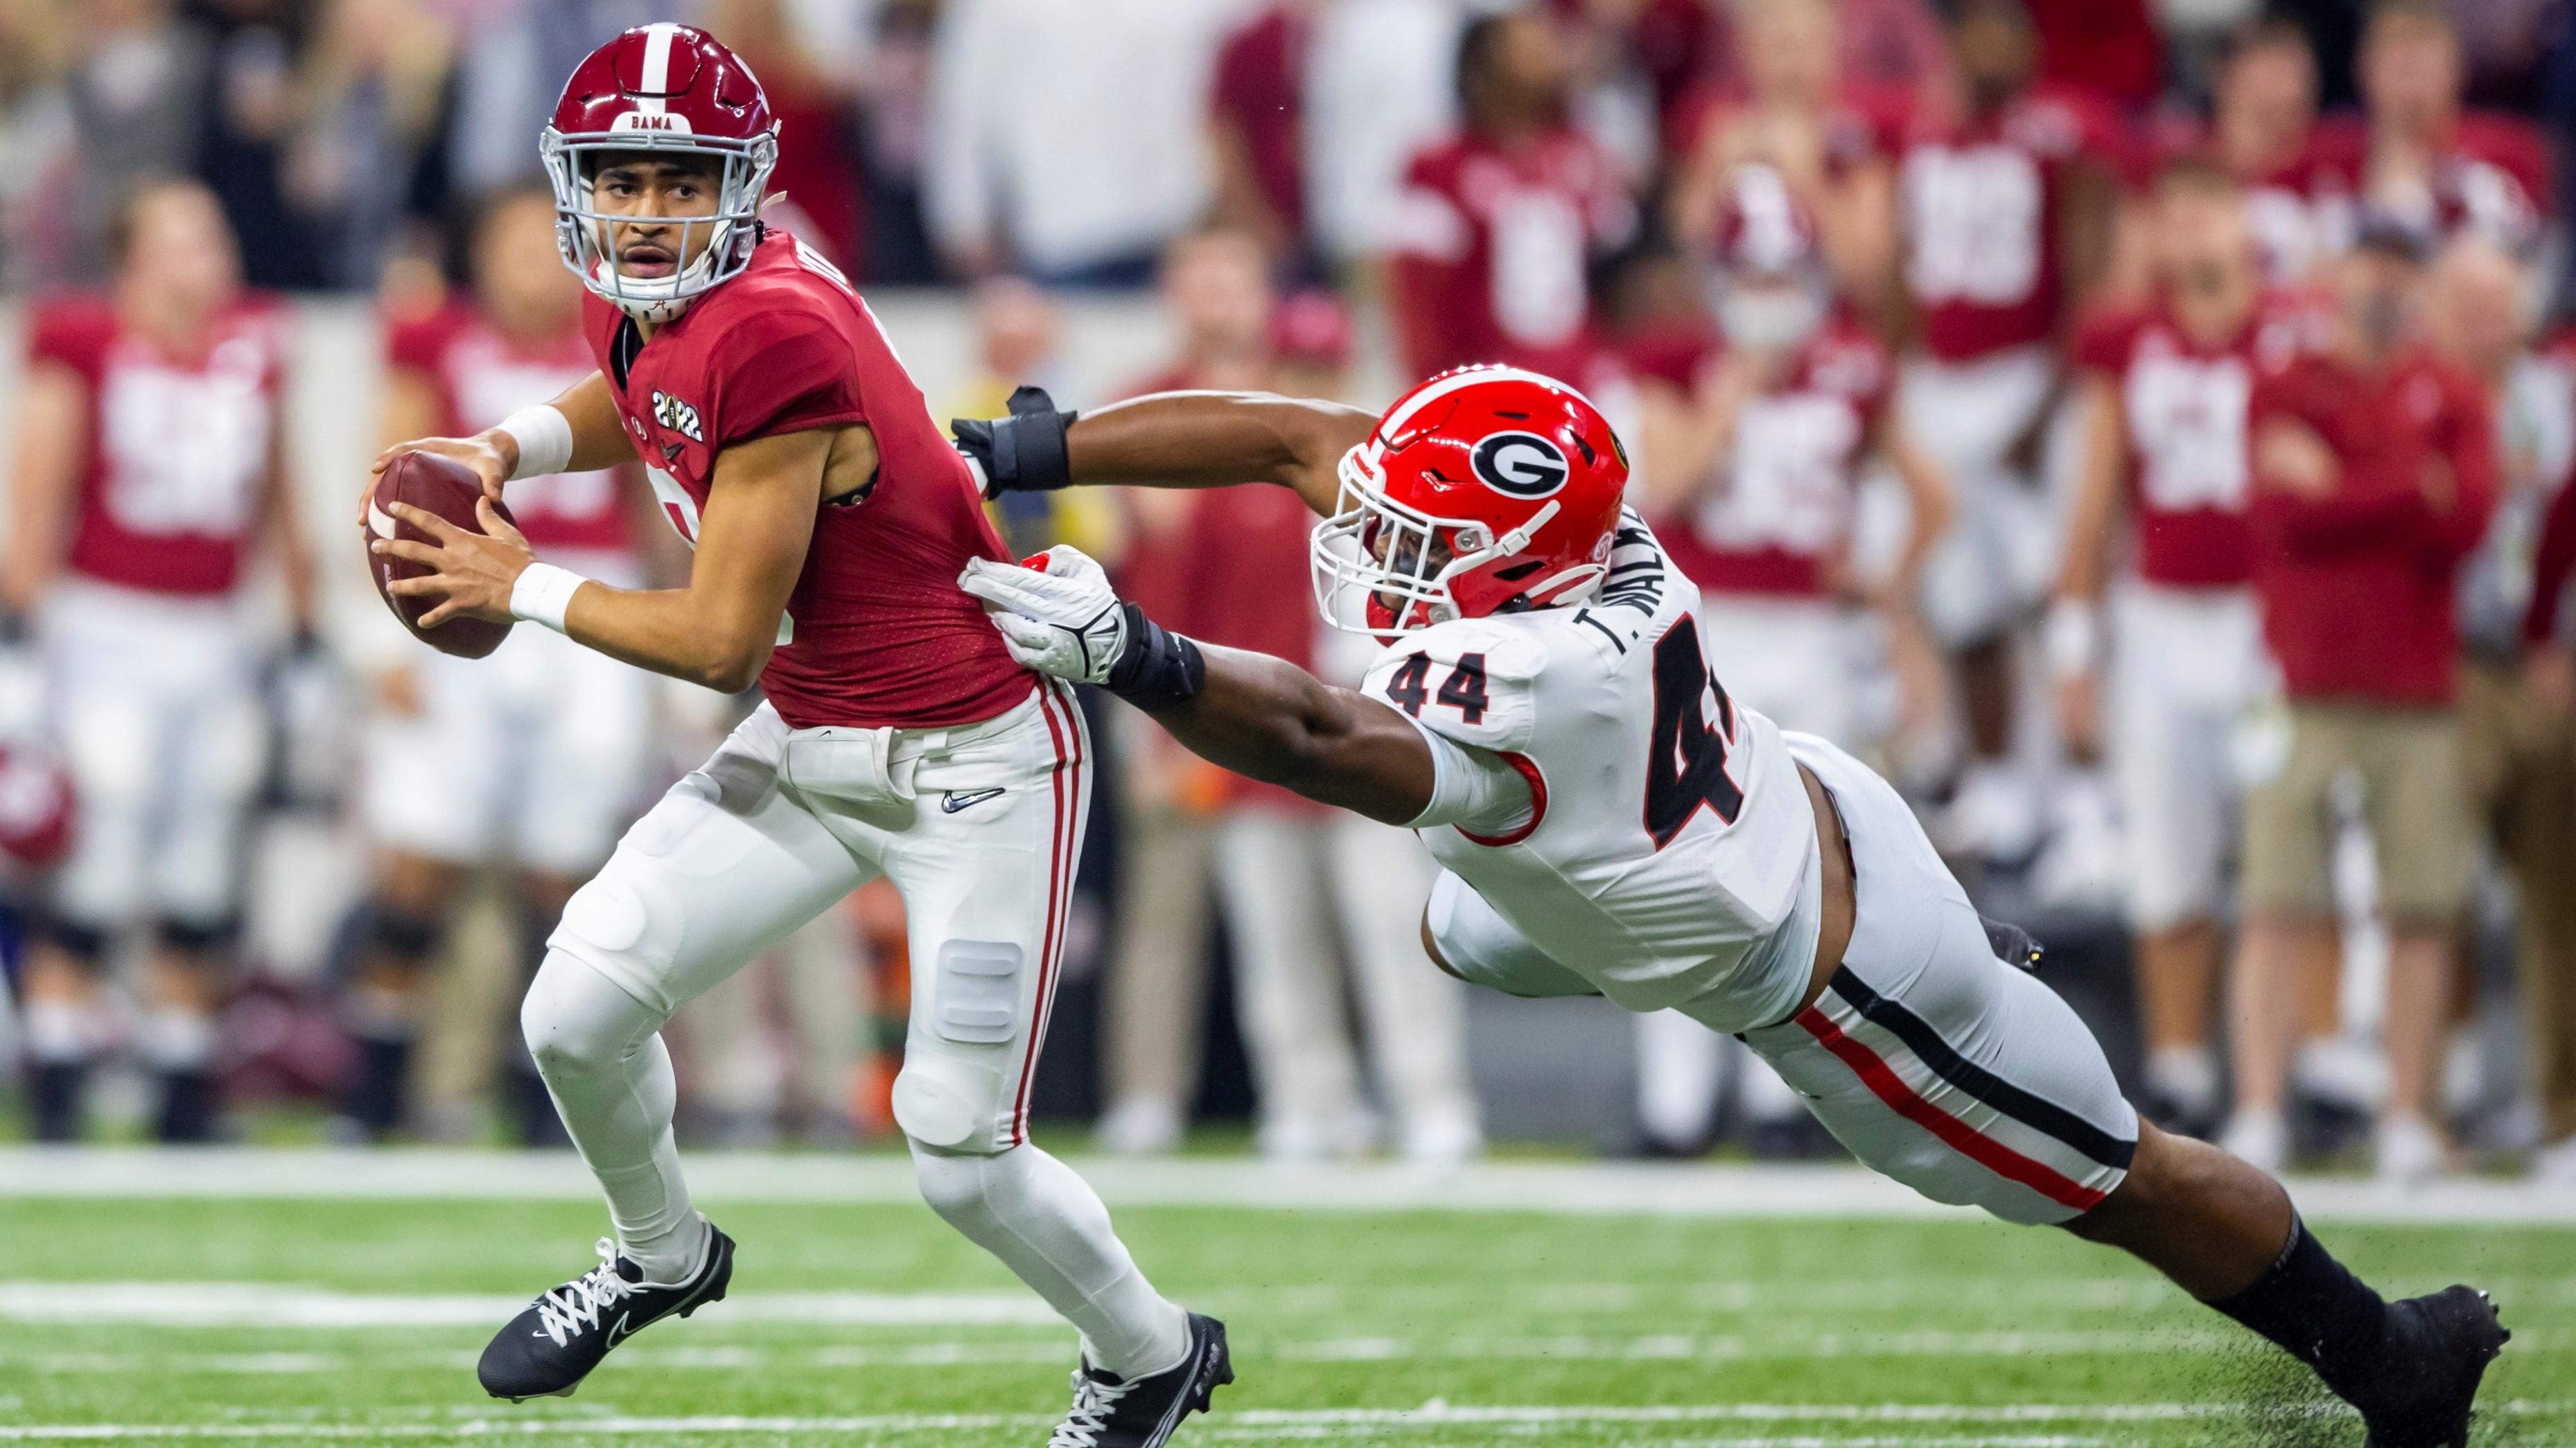 Alabama Crimson Tide quarterback Bryce Young (9) runs the ball against Georgia Bulldogs defensive lineman Travon Walker (44) during the first quarter in the 2022 CFP college football national championship game at Lucas Oil Stadium. / Mark J. Rebilas-USA TODAY Sports